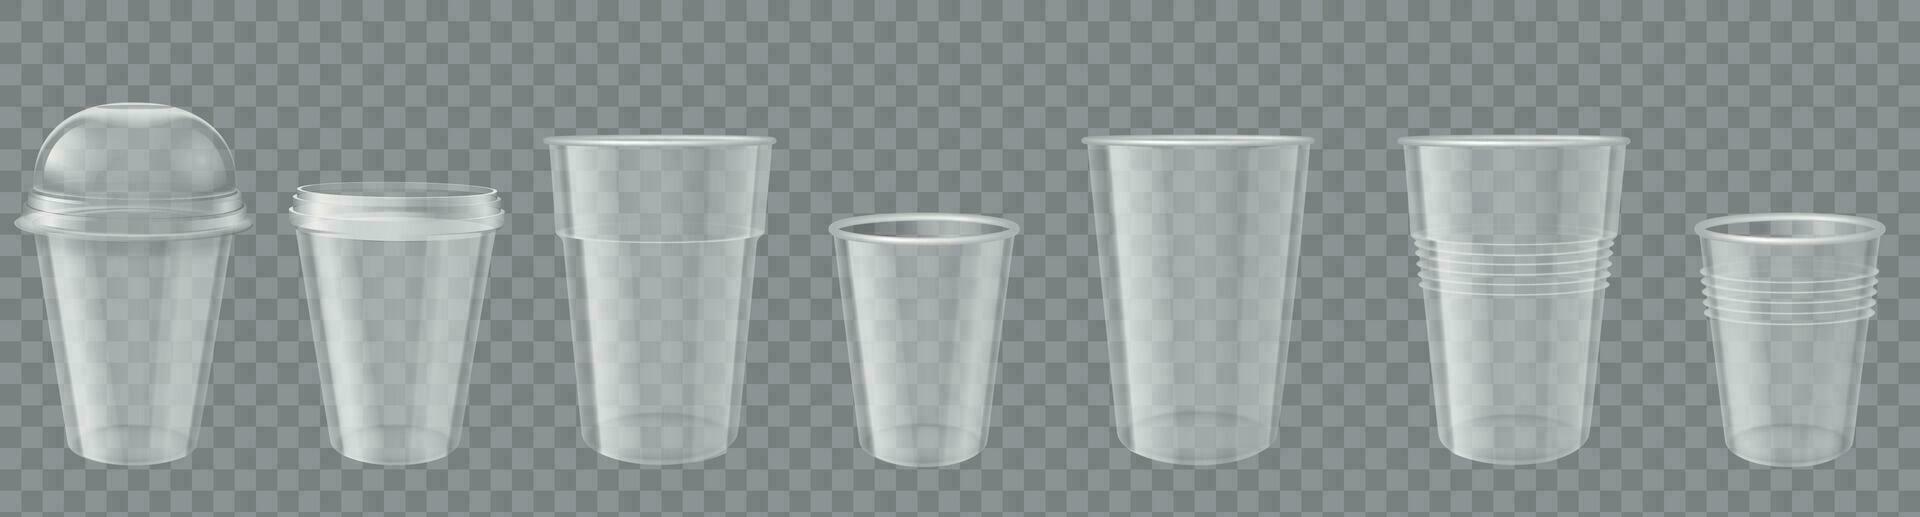 Plastic cup. Realistic transparent disposable cups with cap. Empty drink containers mockup. Packages for coffee or cold beverage vector set